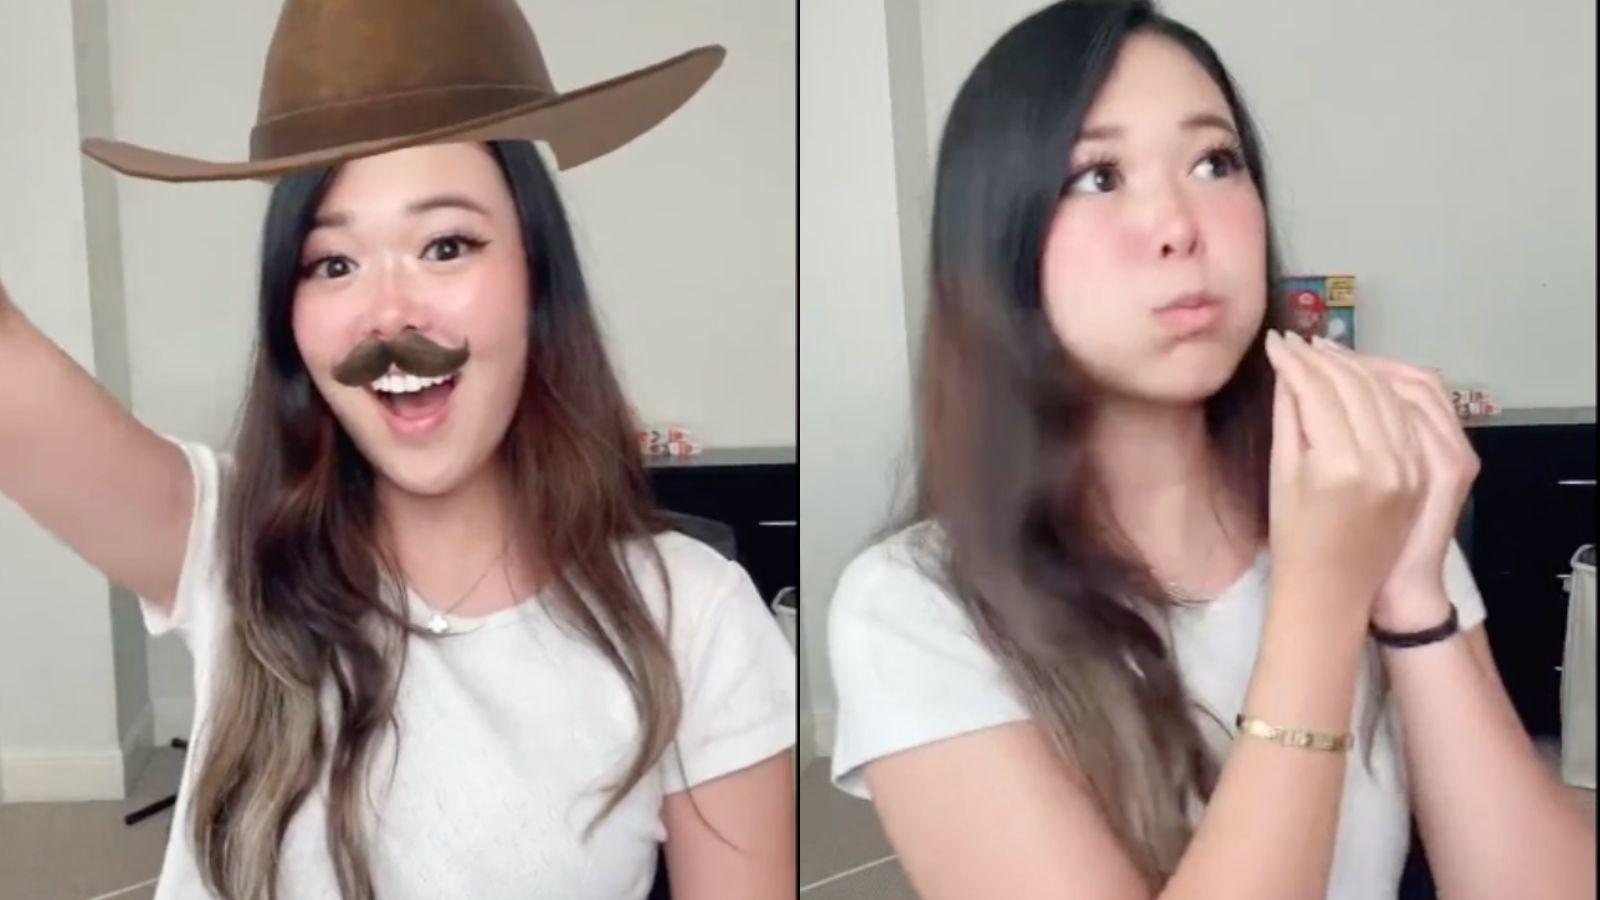 The Rise of NPC Streamers: Let's look at this Bizarre TikTok Trend -  Skinnedcartree